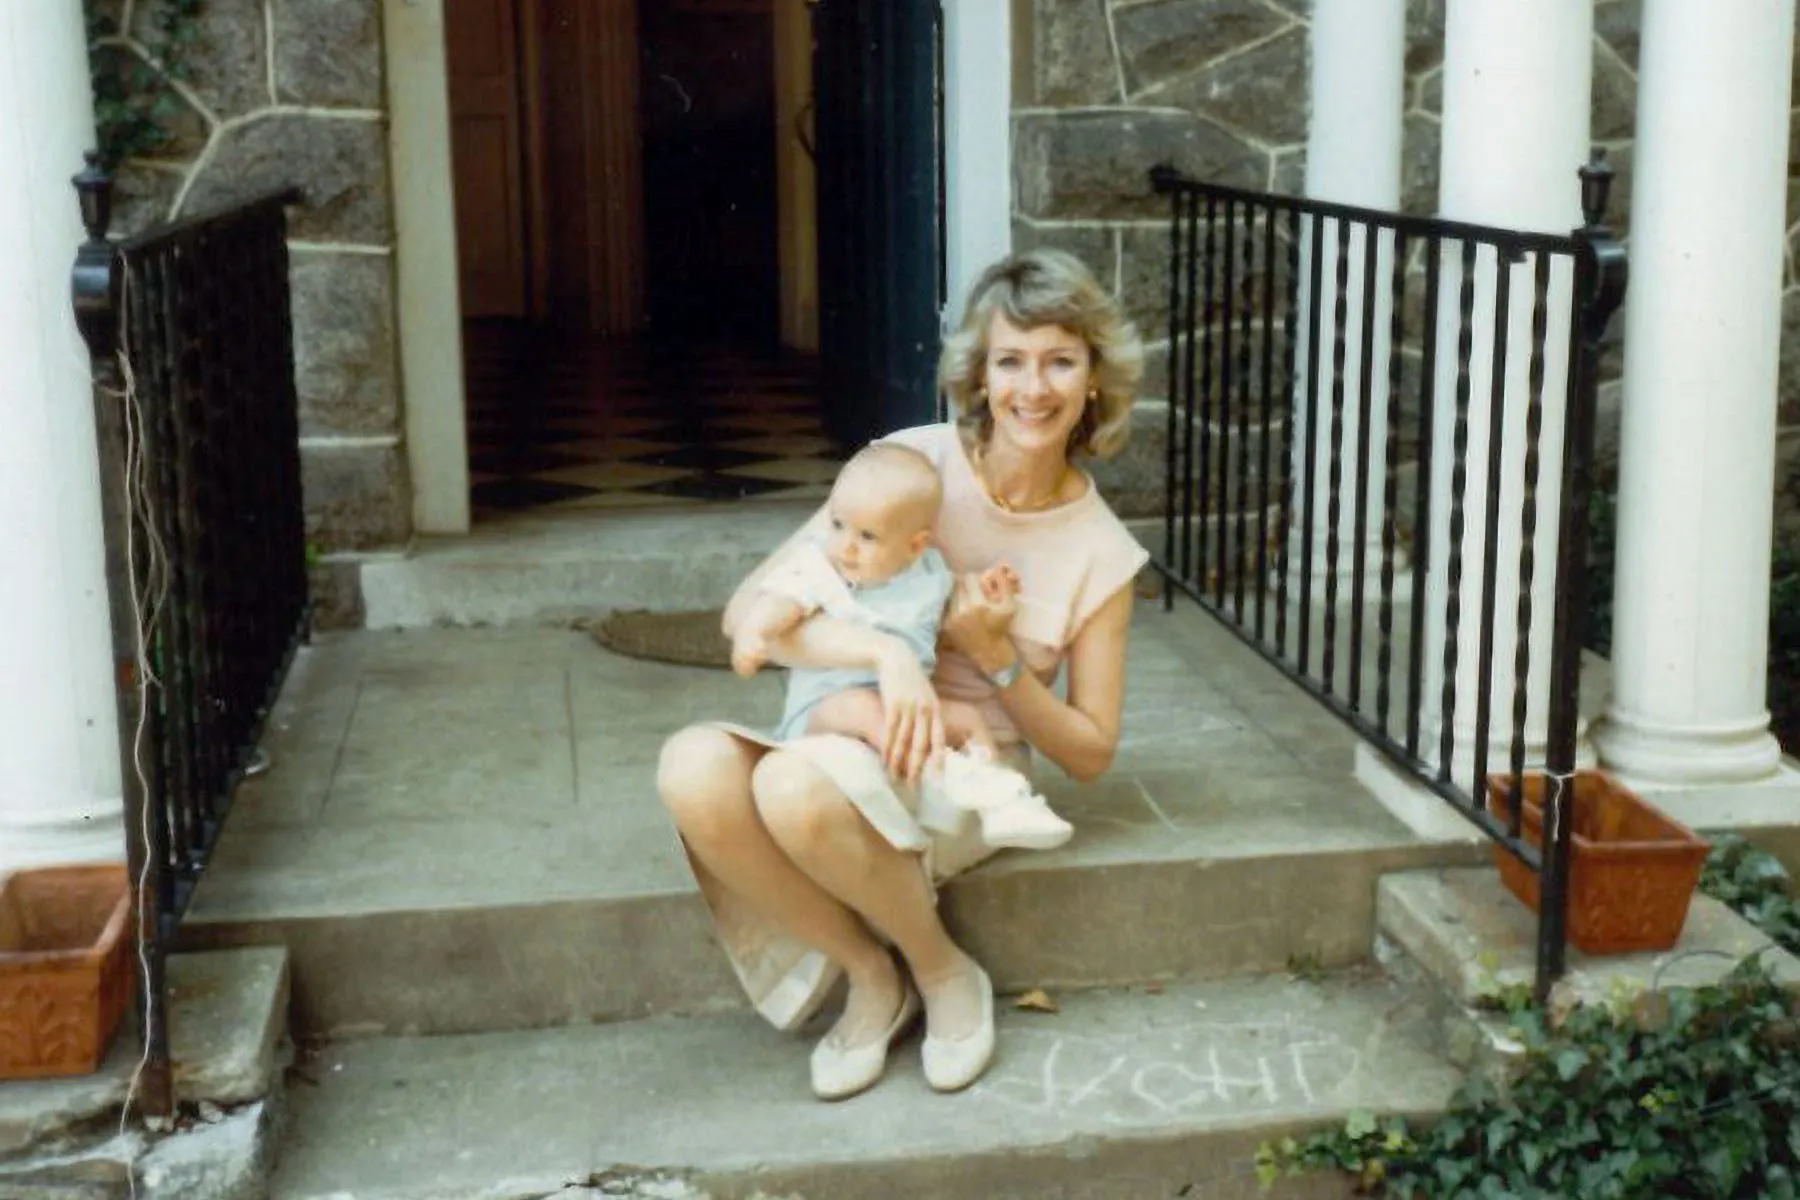 Woodruff and her son Benjamin in the 1980s